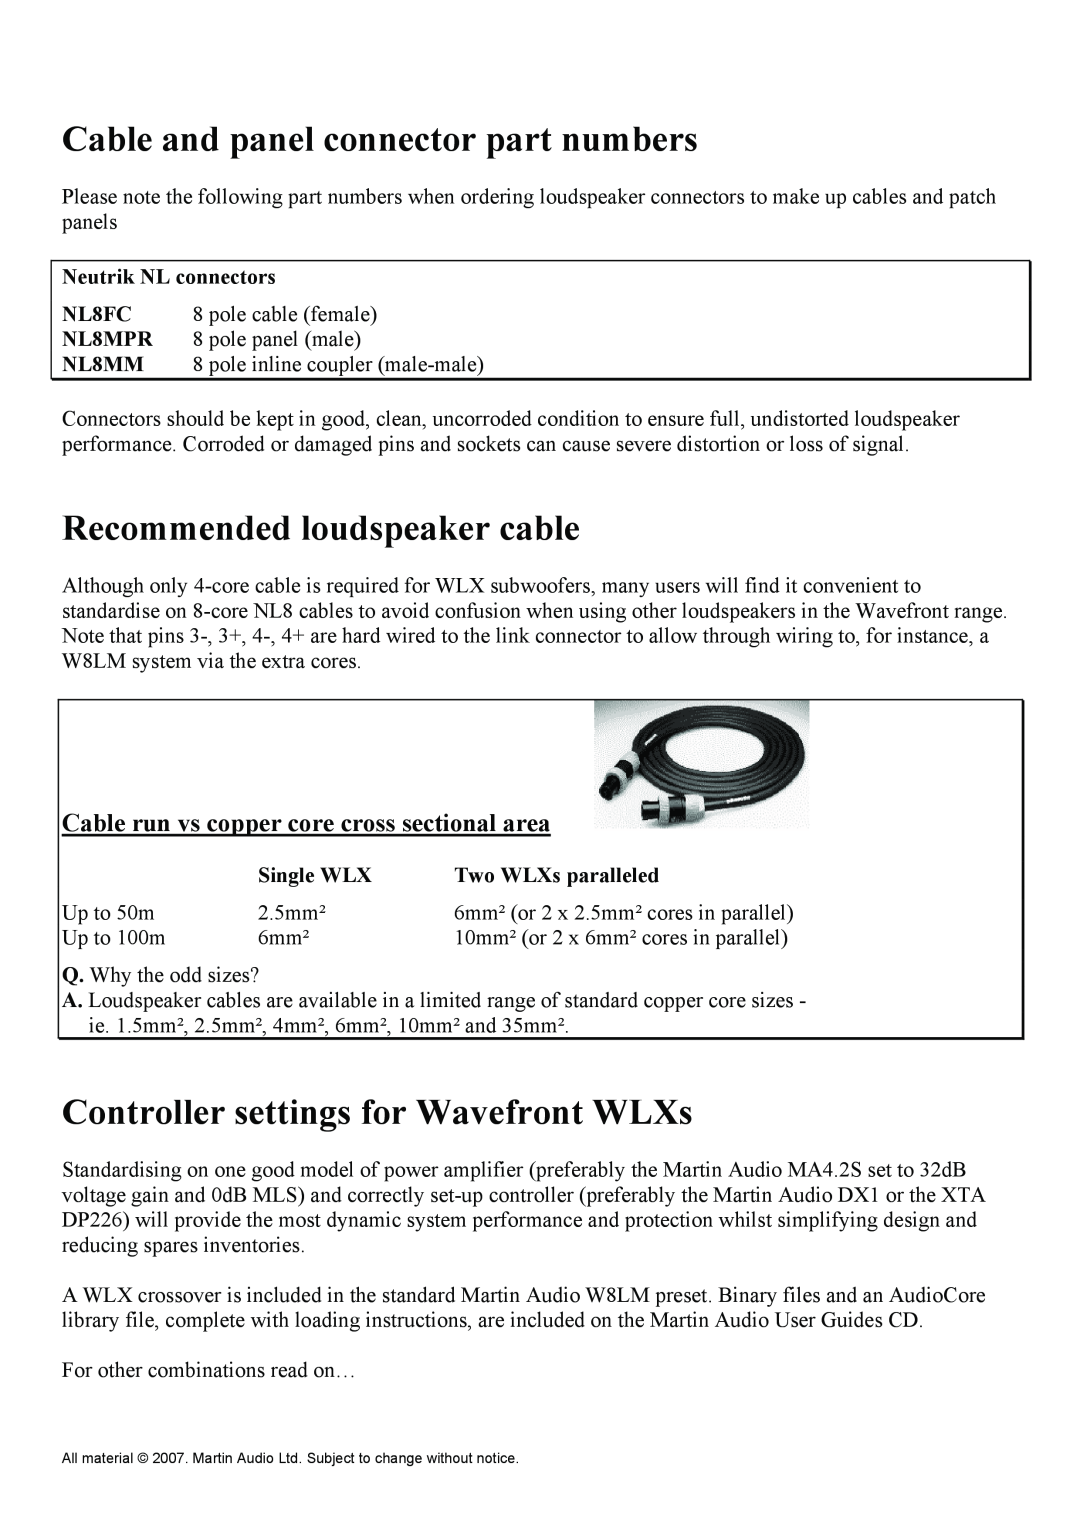 Martin Audio WLXGS manual Cable and panel connector part numbers, Recommended loudspeaker cable 